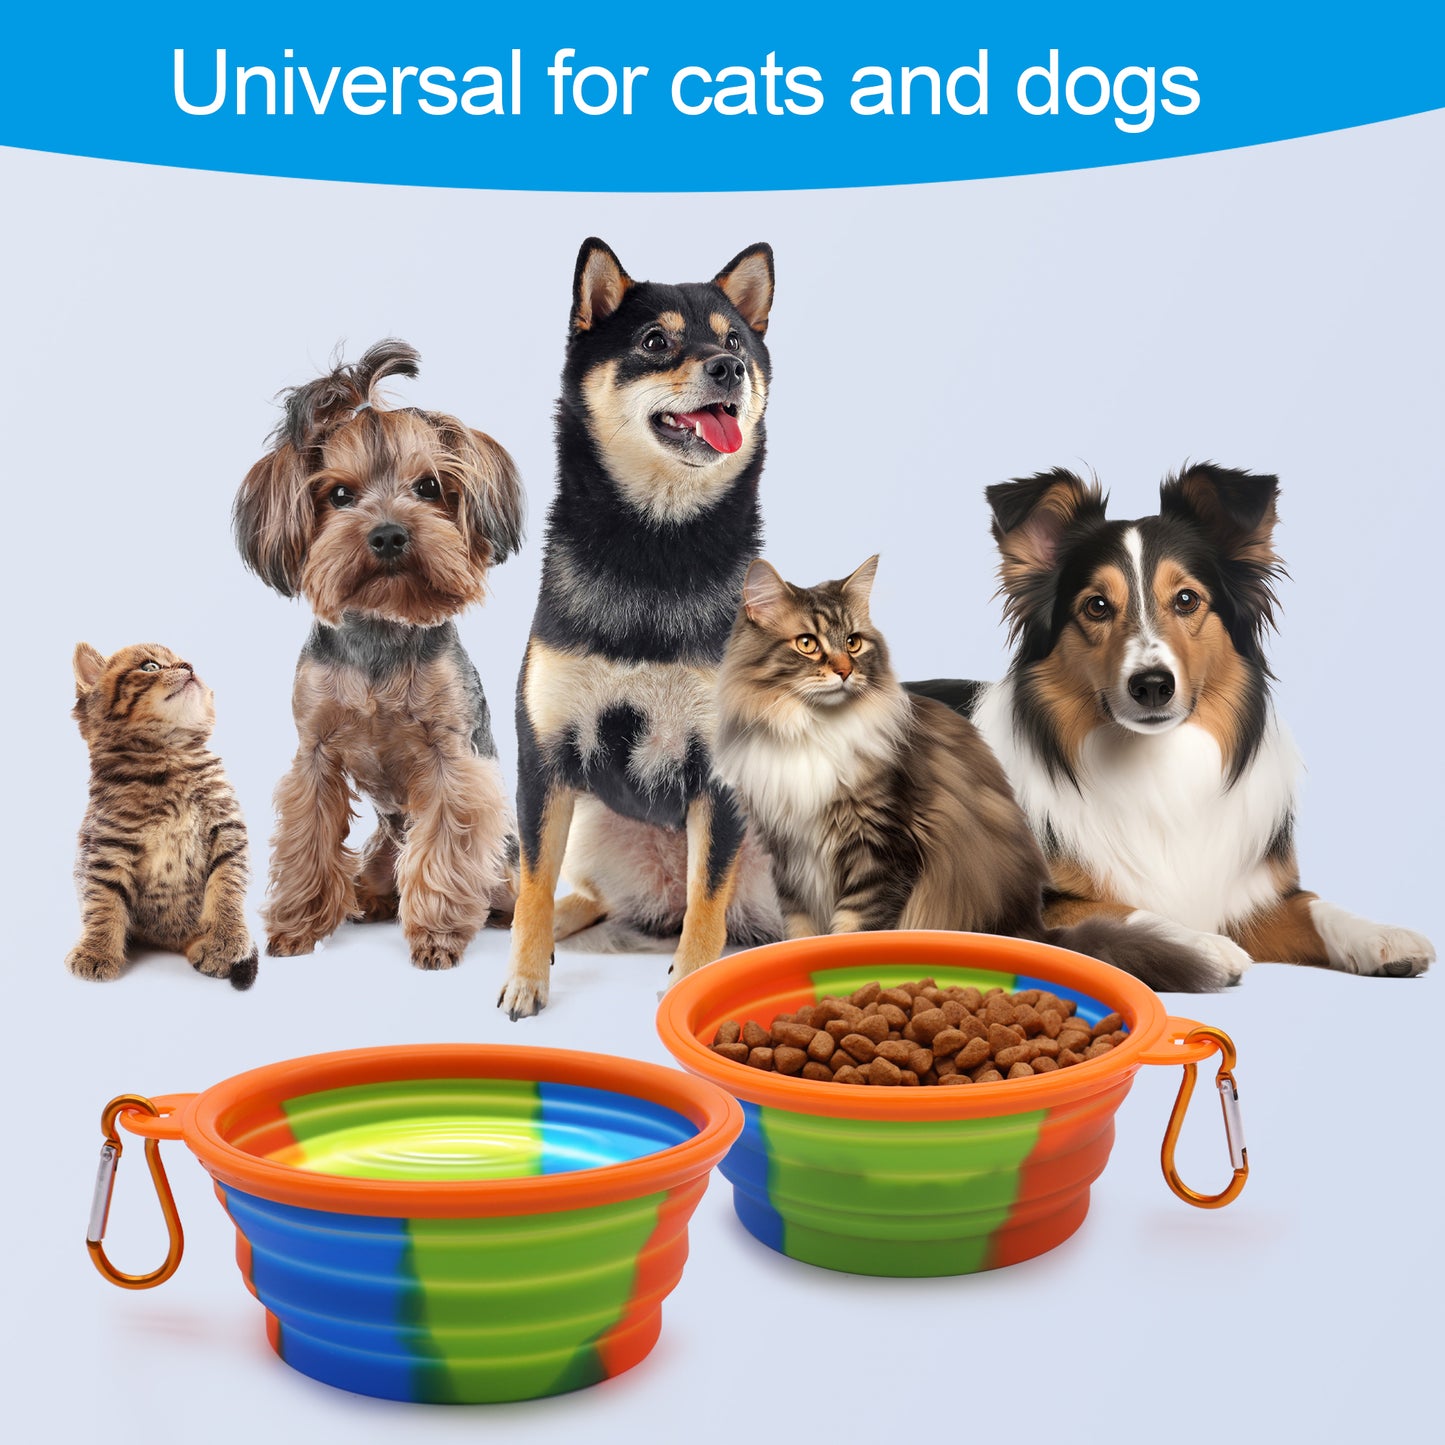 Royal Pets USA Collapsible Dog Travel Bowls, Portable Water Bowl for Dogs or Cats Pet Foldable Feeding Water or Treat for Traveling, Walking & Camping with Carabiner, BPA Free (Blue, 350ml)